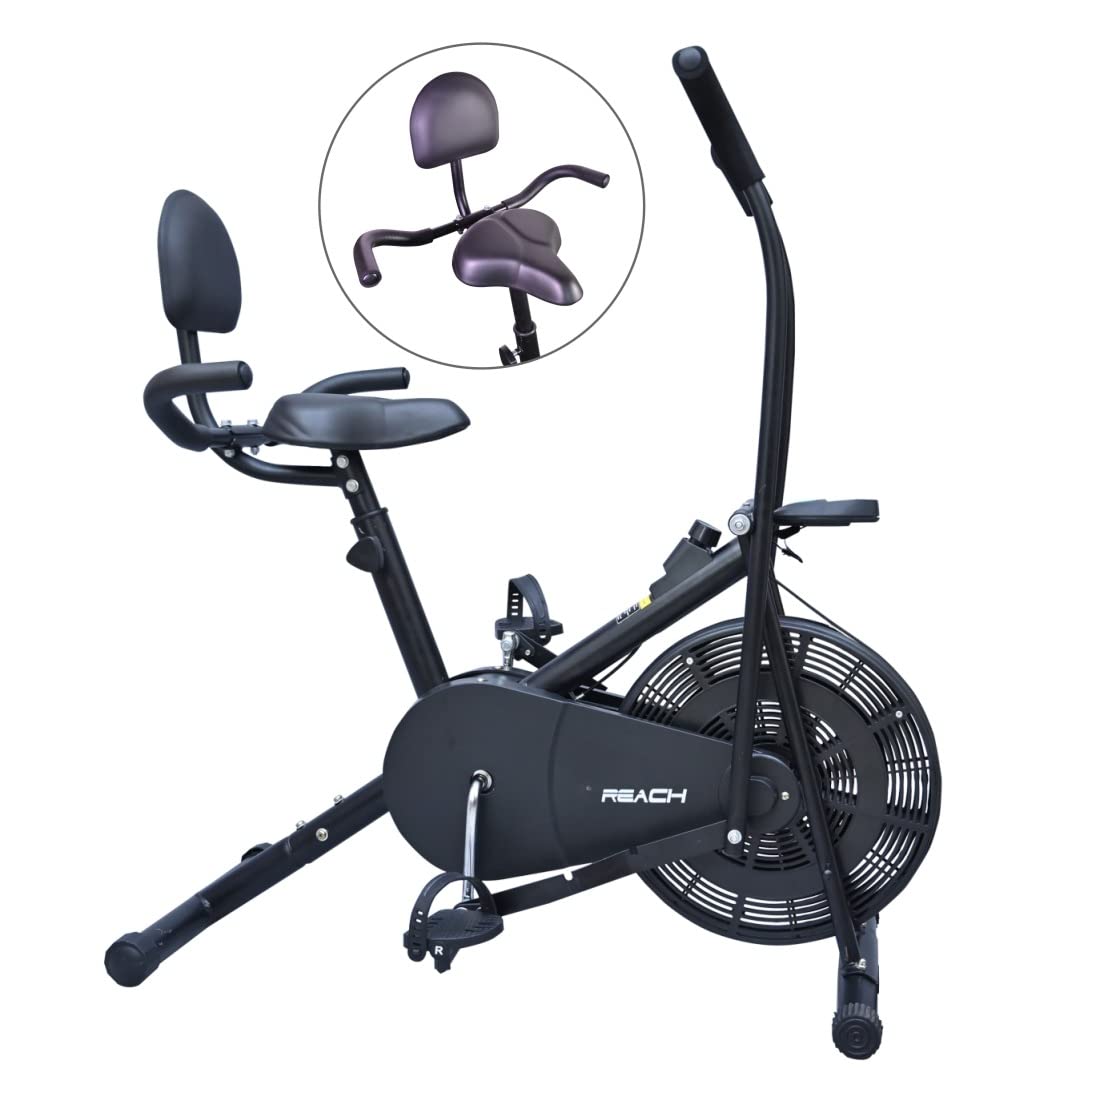 ELEV8 by Reach AB-110 BH Air Bike Exercise Cycle with Moving or Stationary Handle | with Back Support Seat & Side Handle for Support | Cushioned Seat | Fitness Cycle for Home Gym